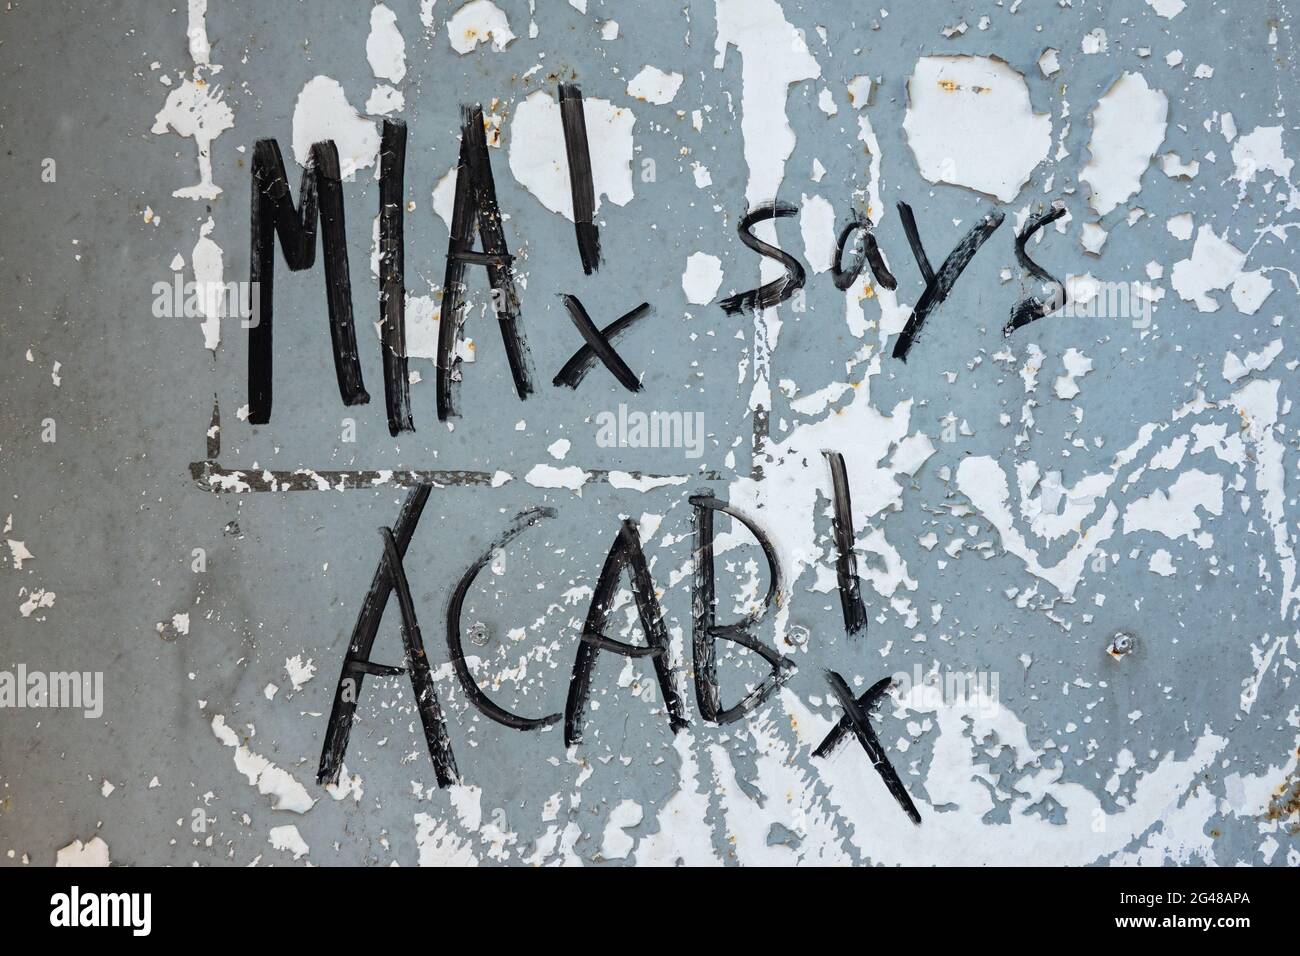 MIA! says ACAB! Writing on a metal door with flaking paint in Helsinki, Finland. Stock Photo